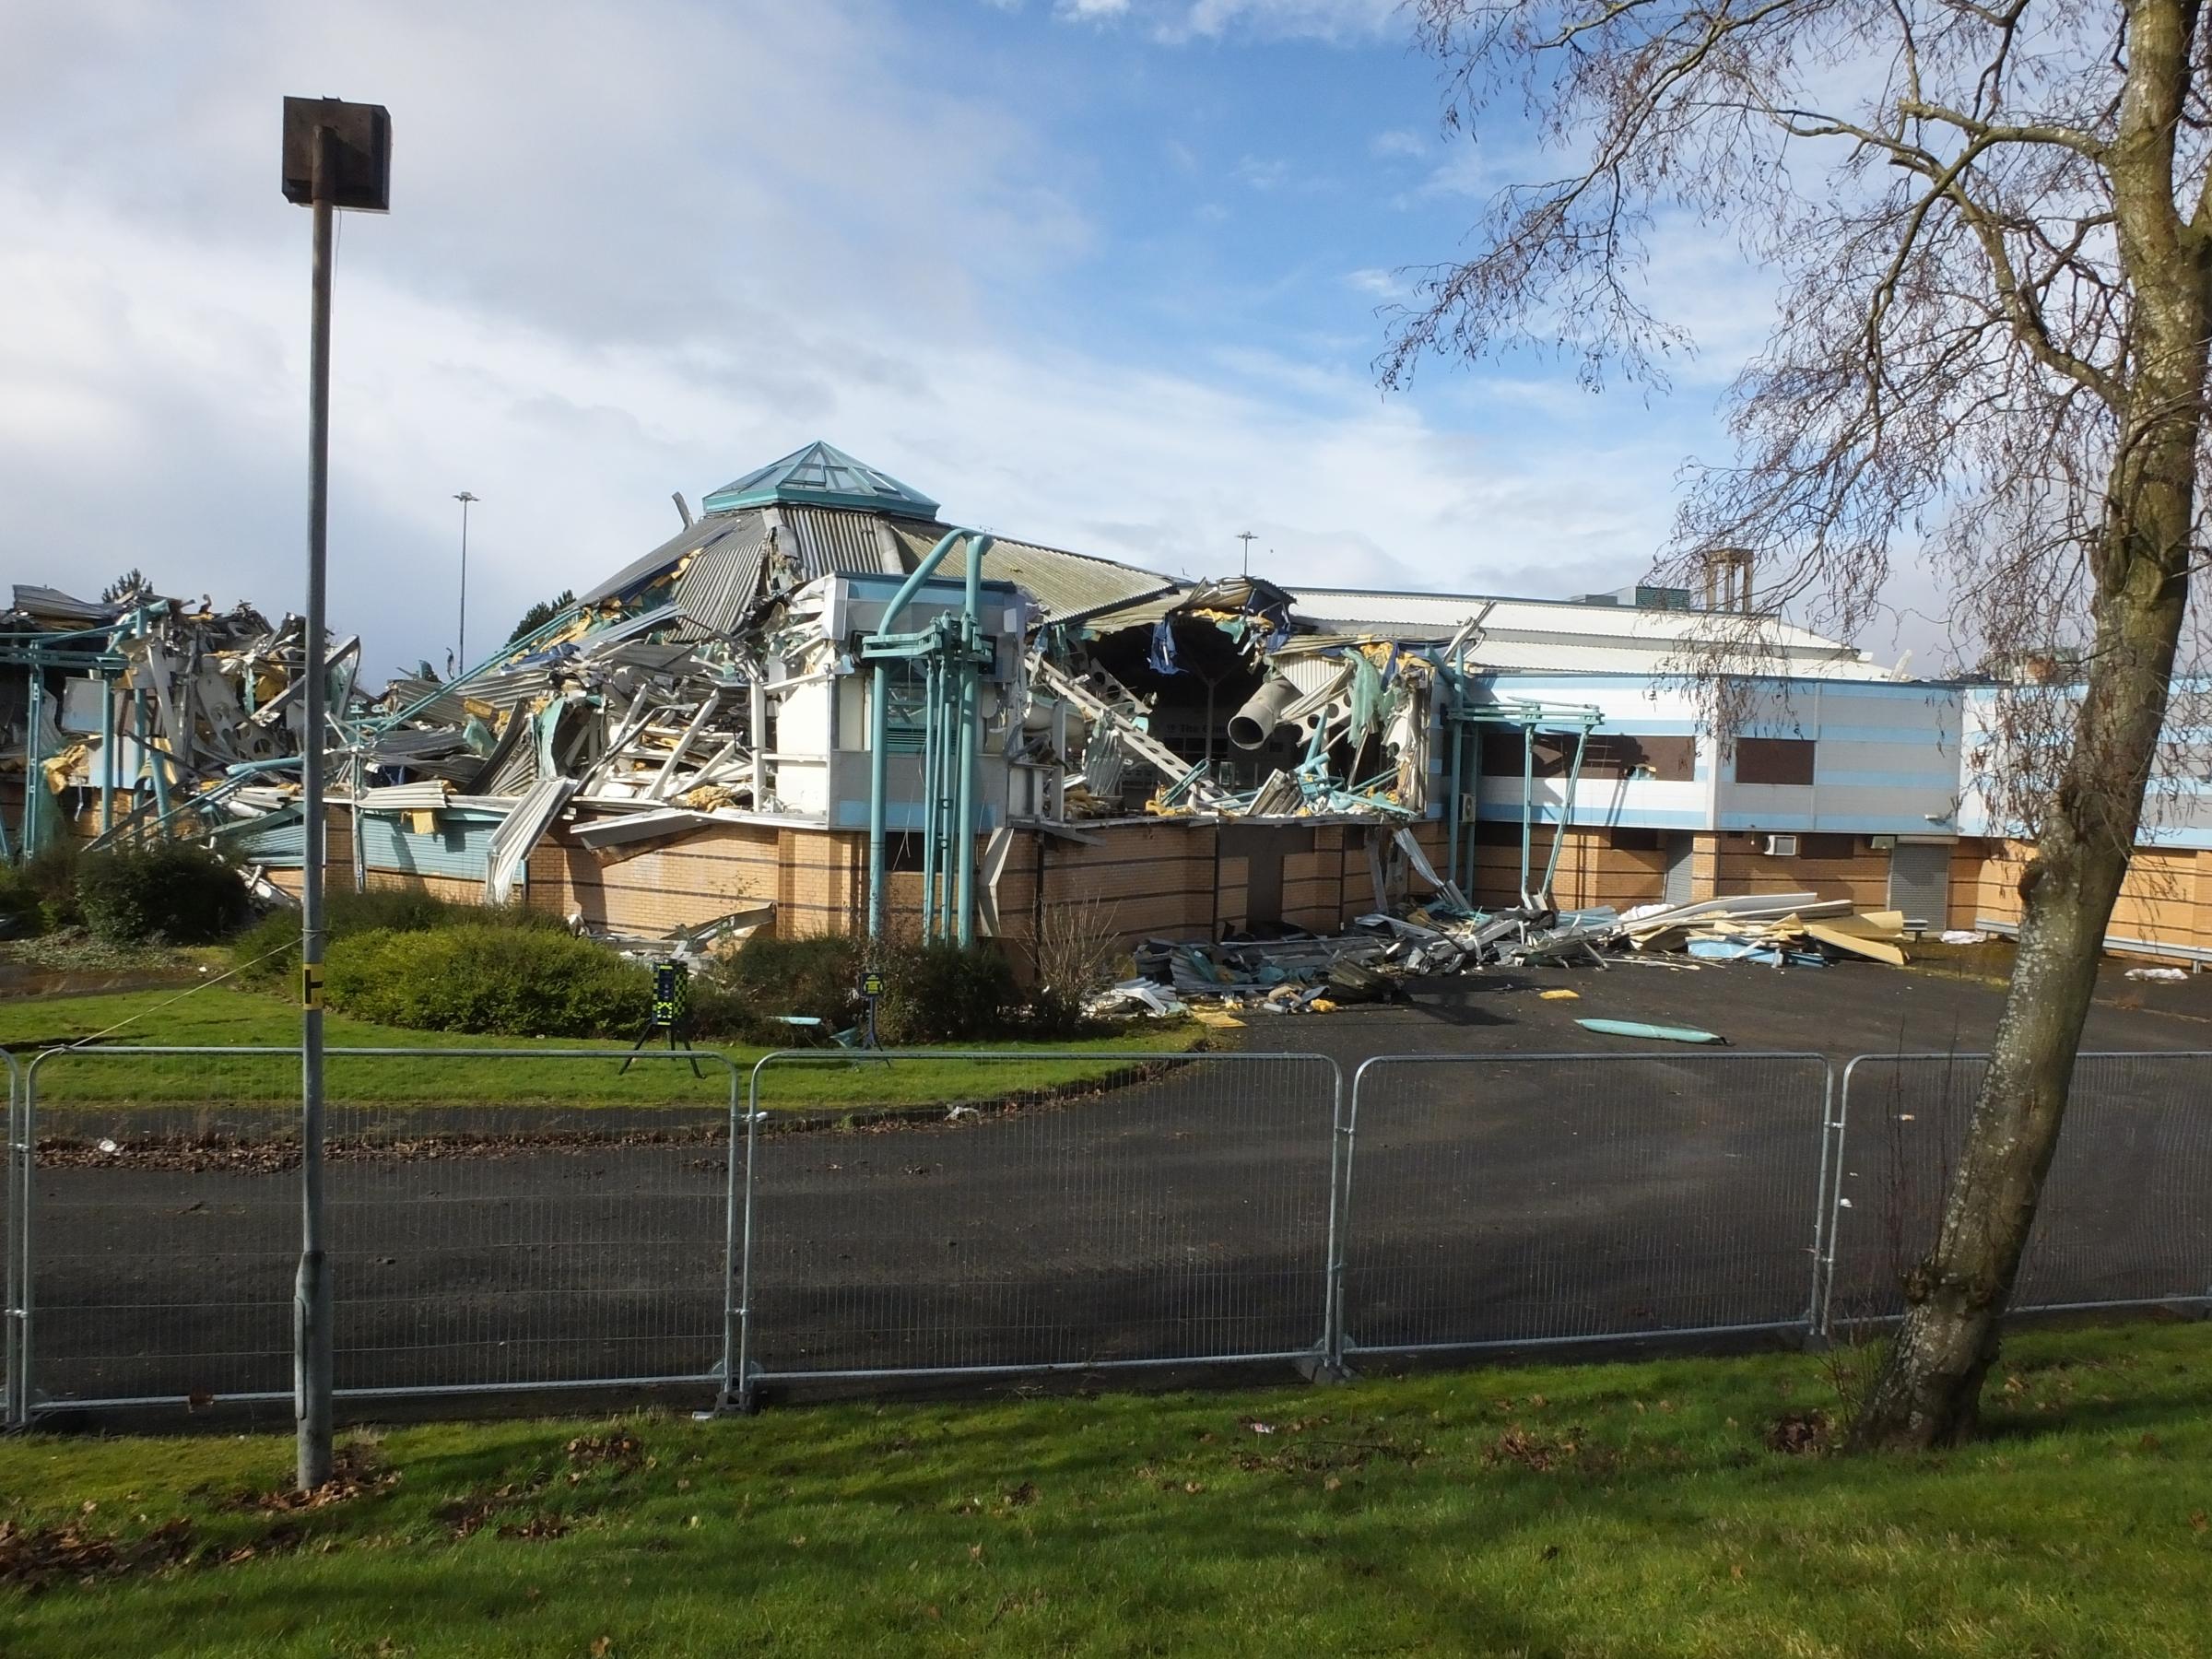 The Play Dromes demolition is continuing